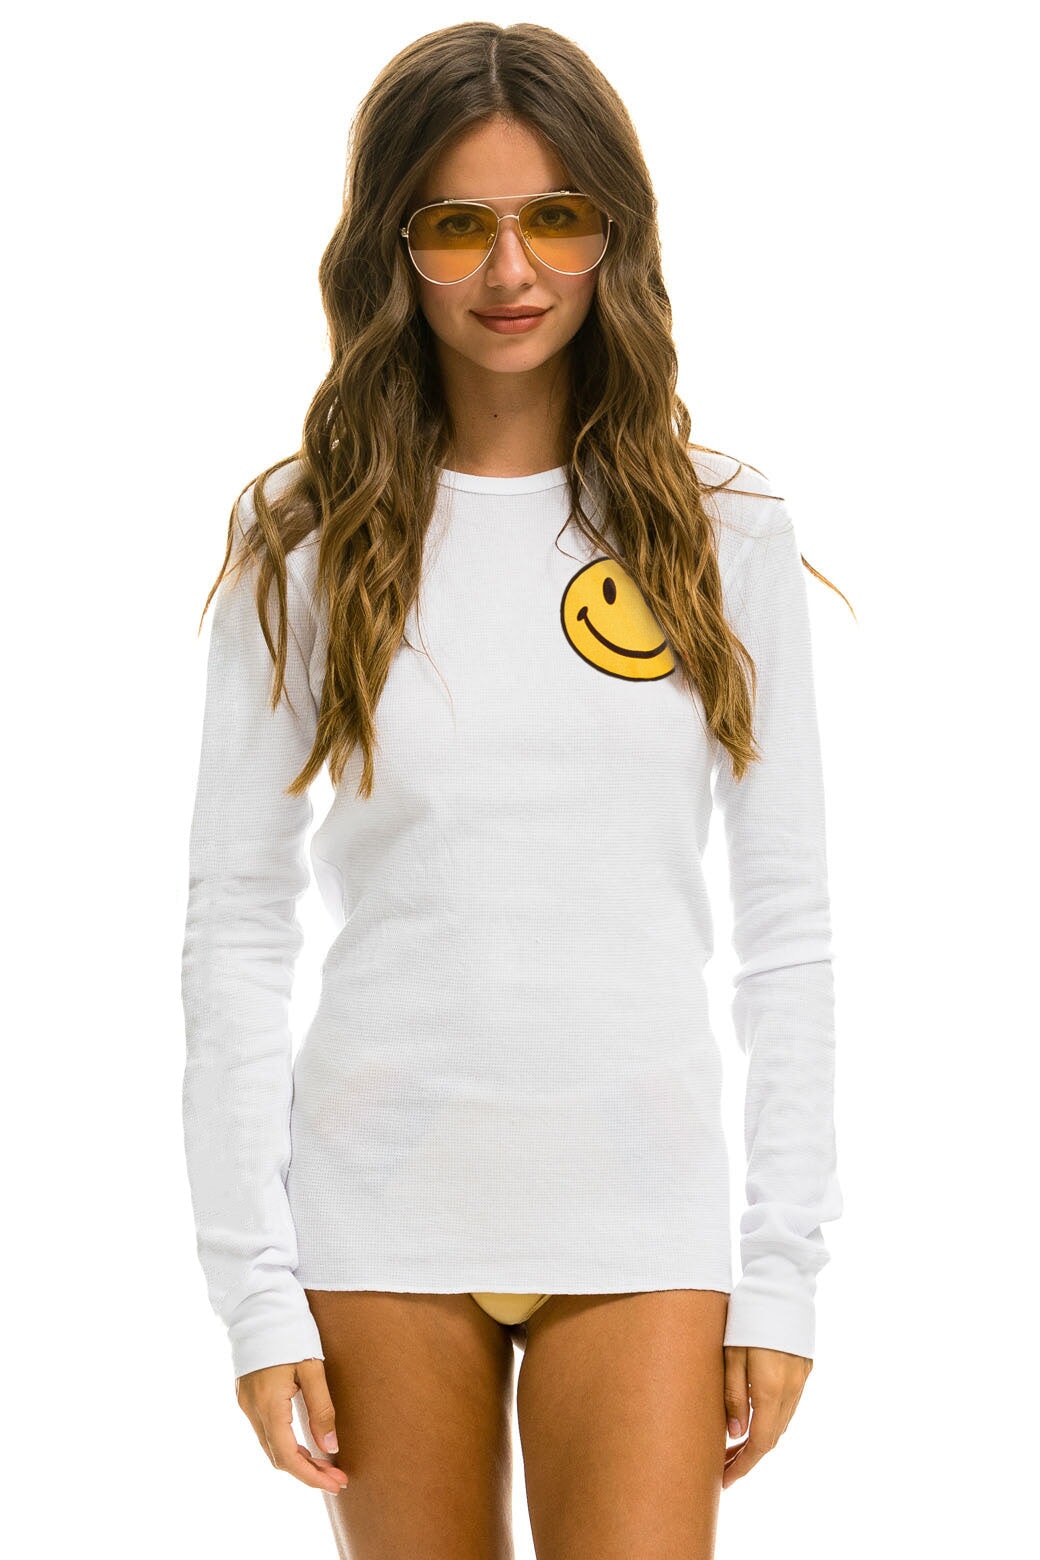 SMILEY 2 THERMAL - WHITE Thermal Aviator Nation 